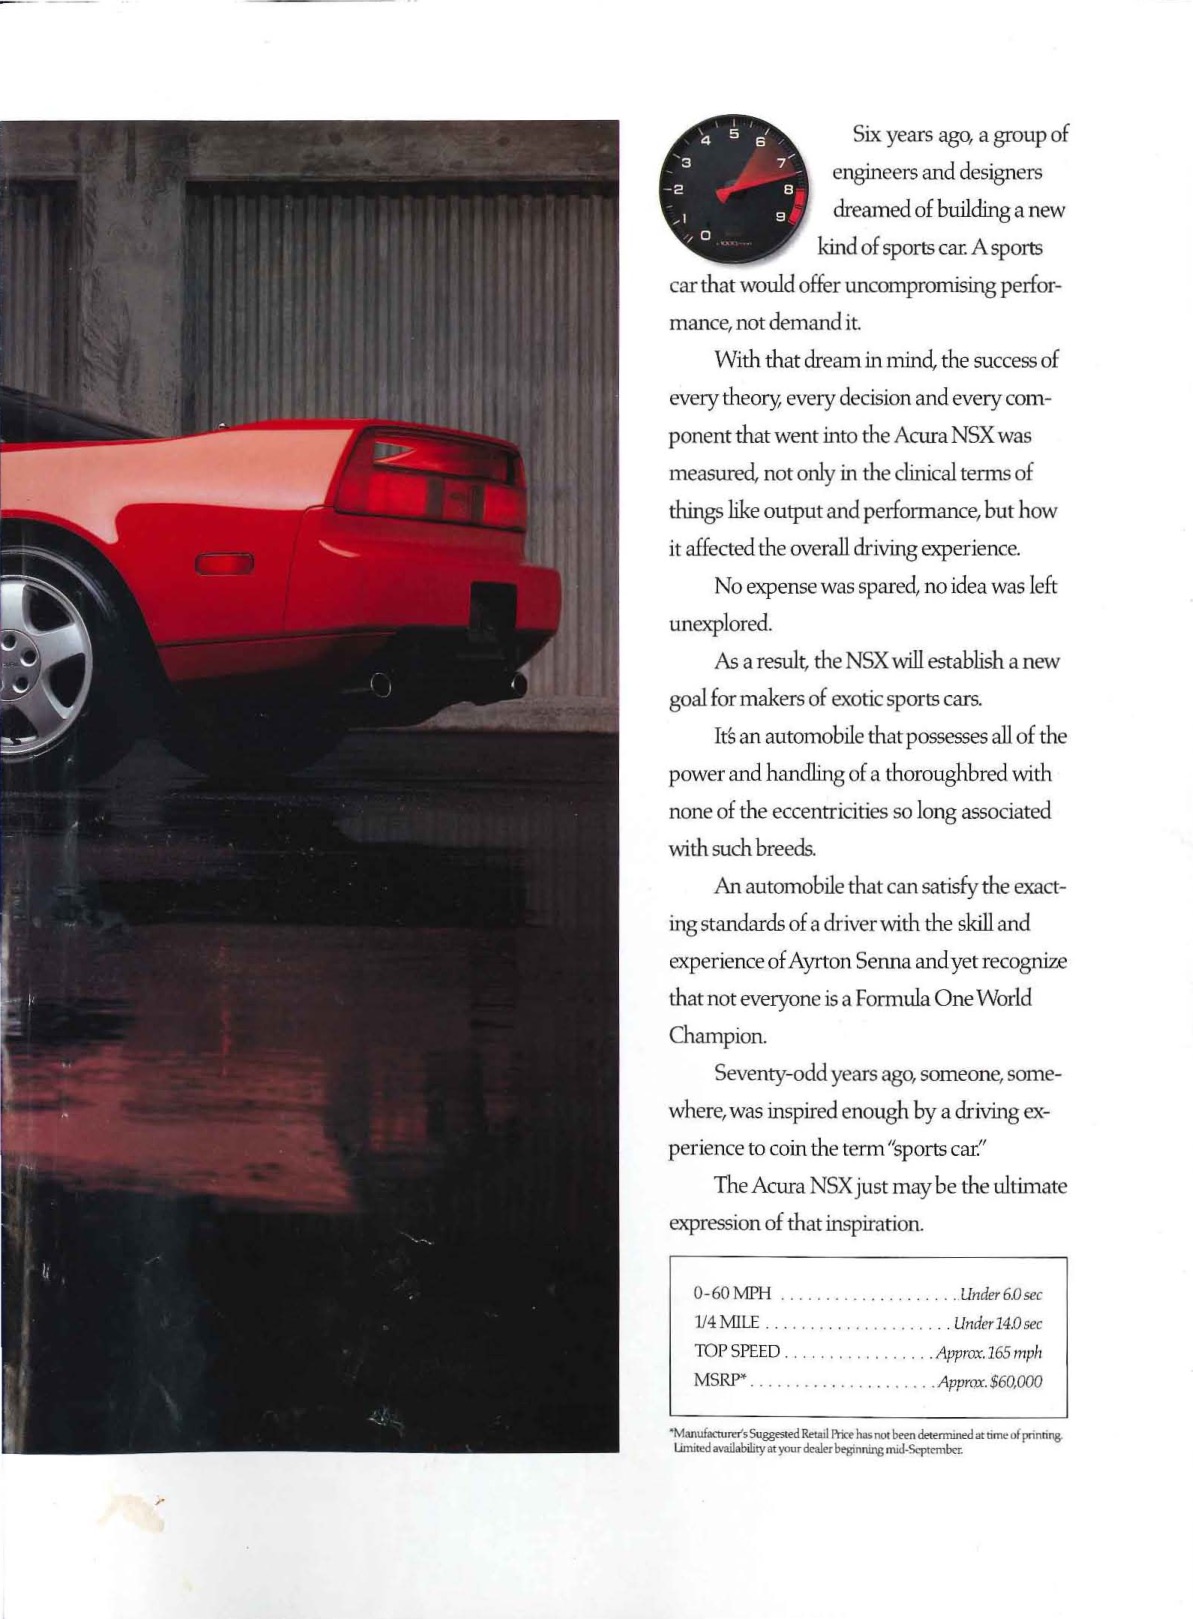 1991 Acura NSX Brochure Page 11